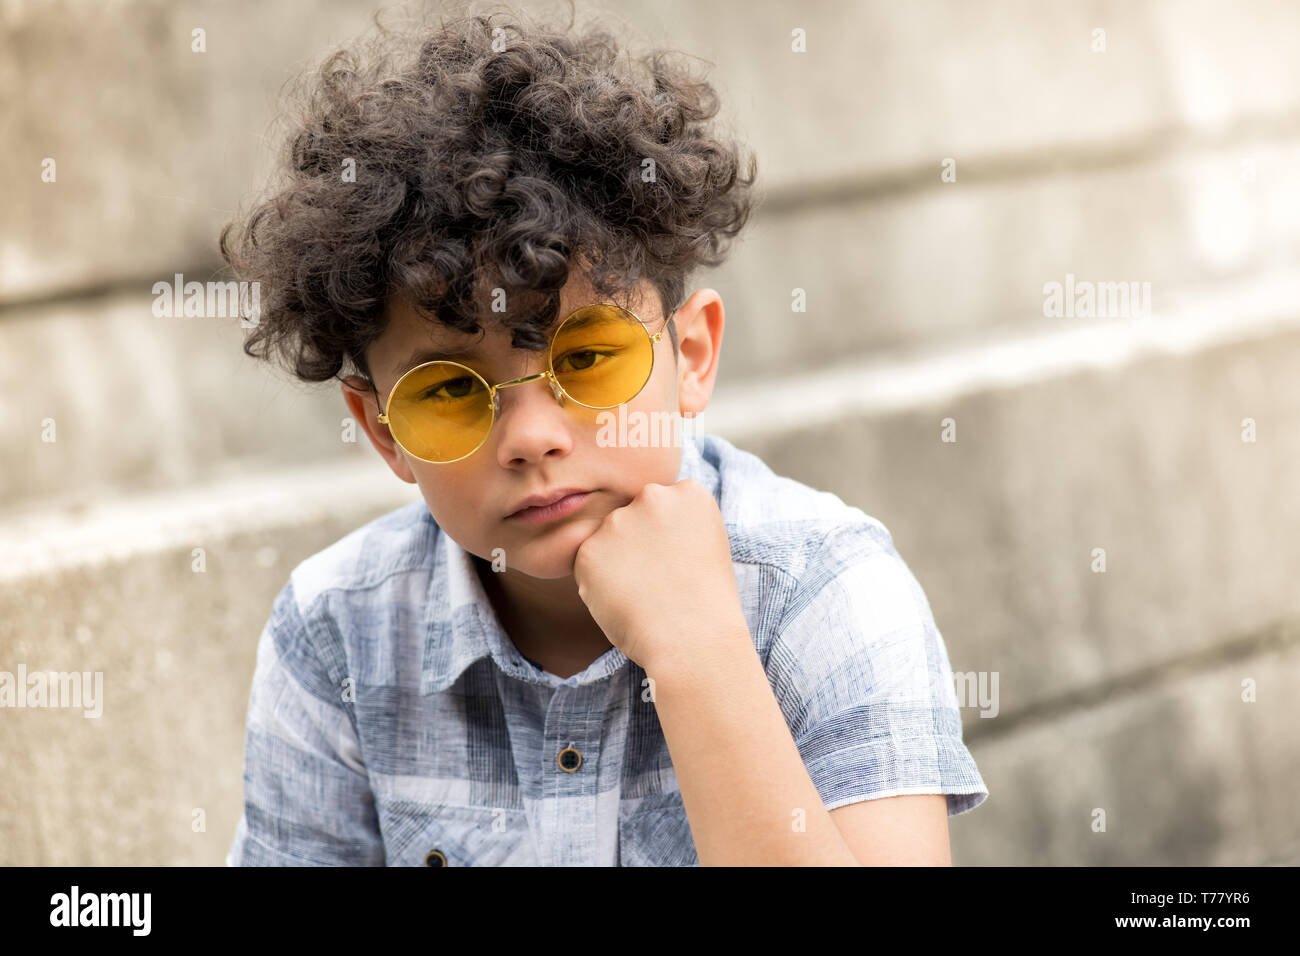 Serious young boy with tousled curly hair sitting on a step outdoors in trendy round yellow sunglasses with chin on hand staring at the camera Stock Photo